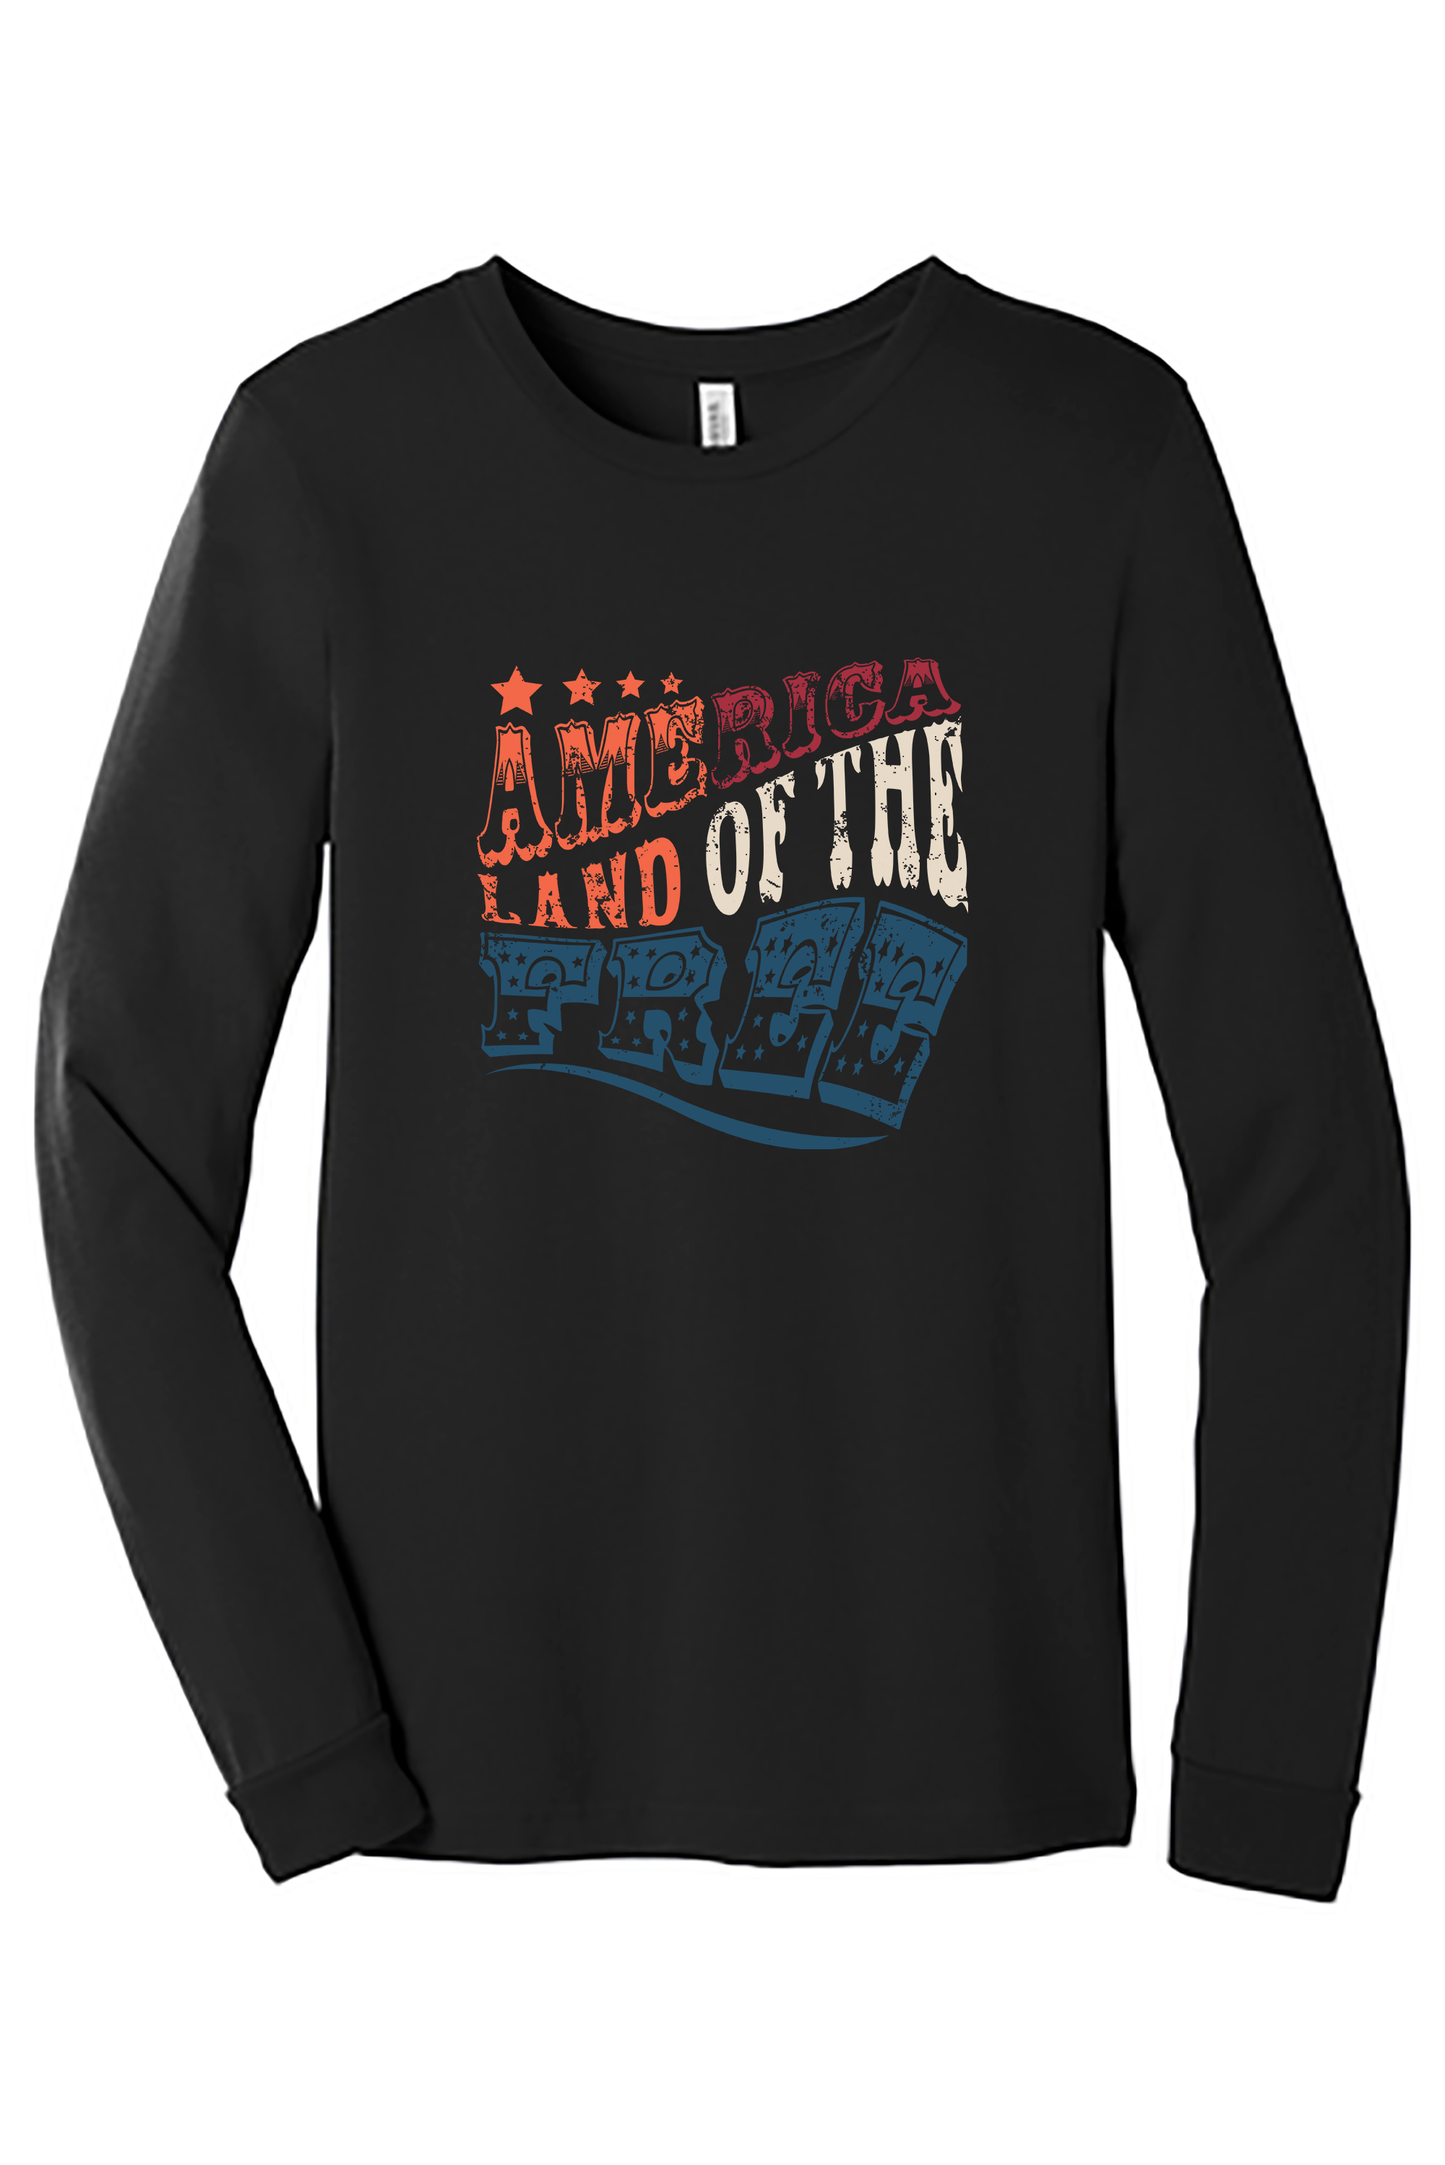 A PLACE TO REMEMBER® America Land Of The Free Patriotic Unisex Jersey Tee